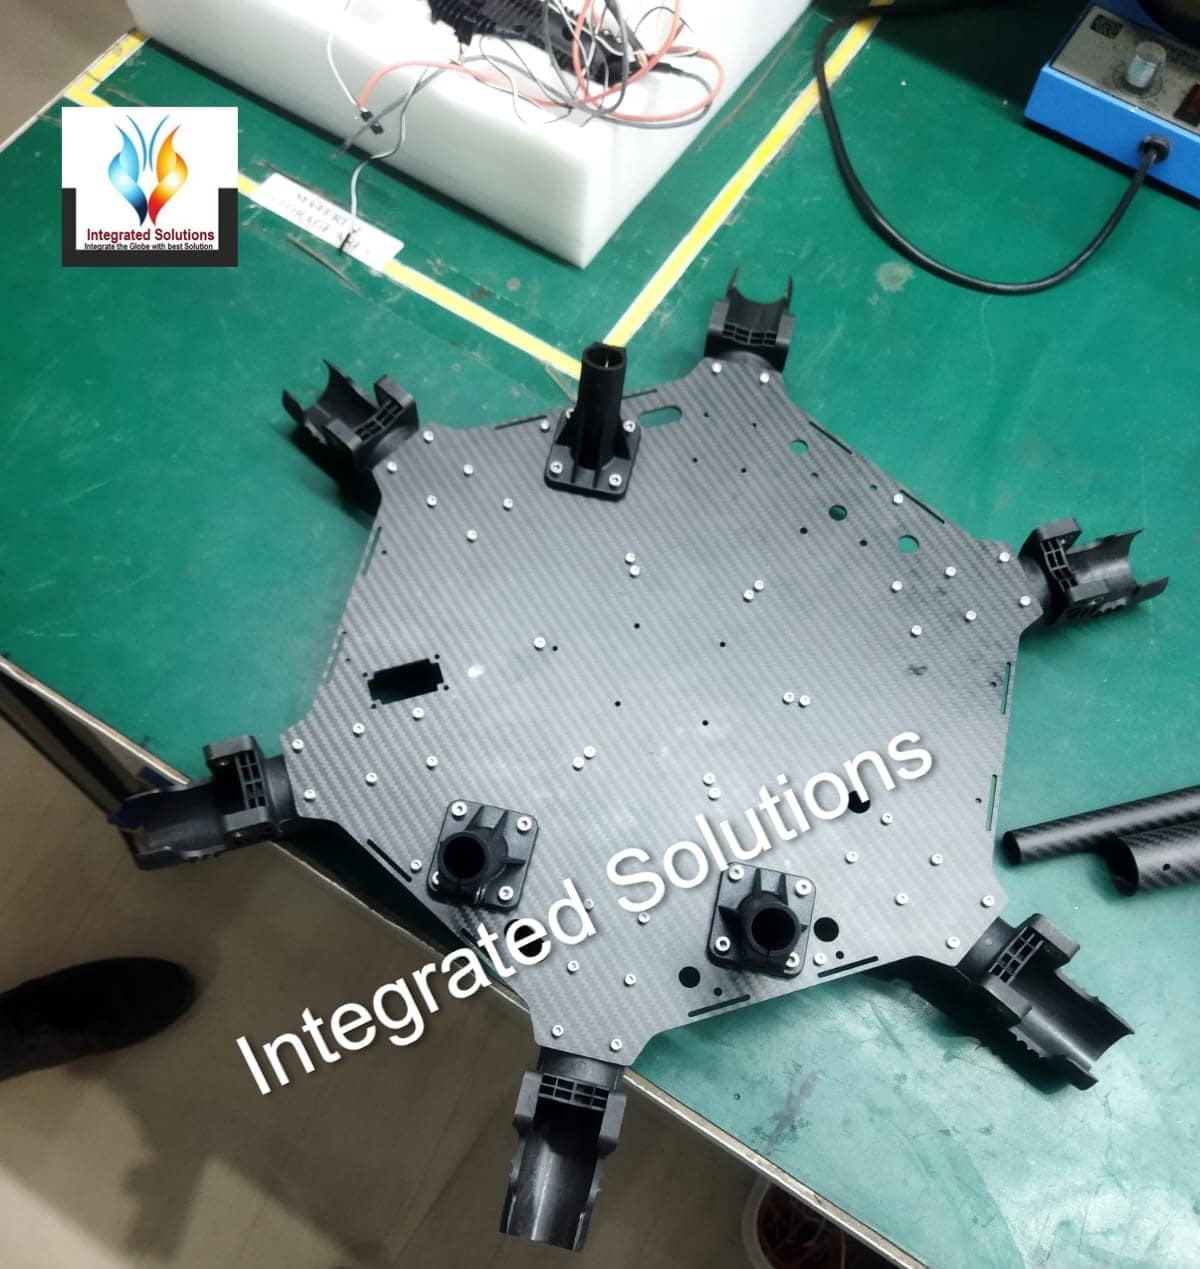 Drone Assembly Fixtures By Integrated Solutions